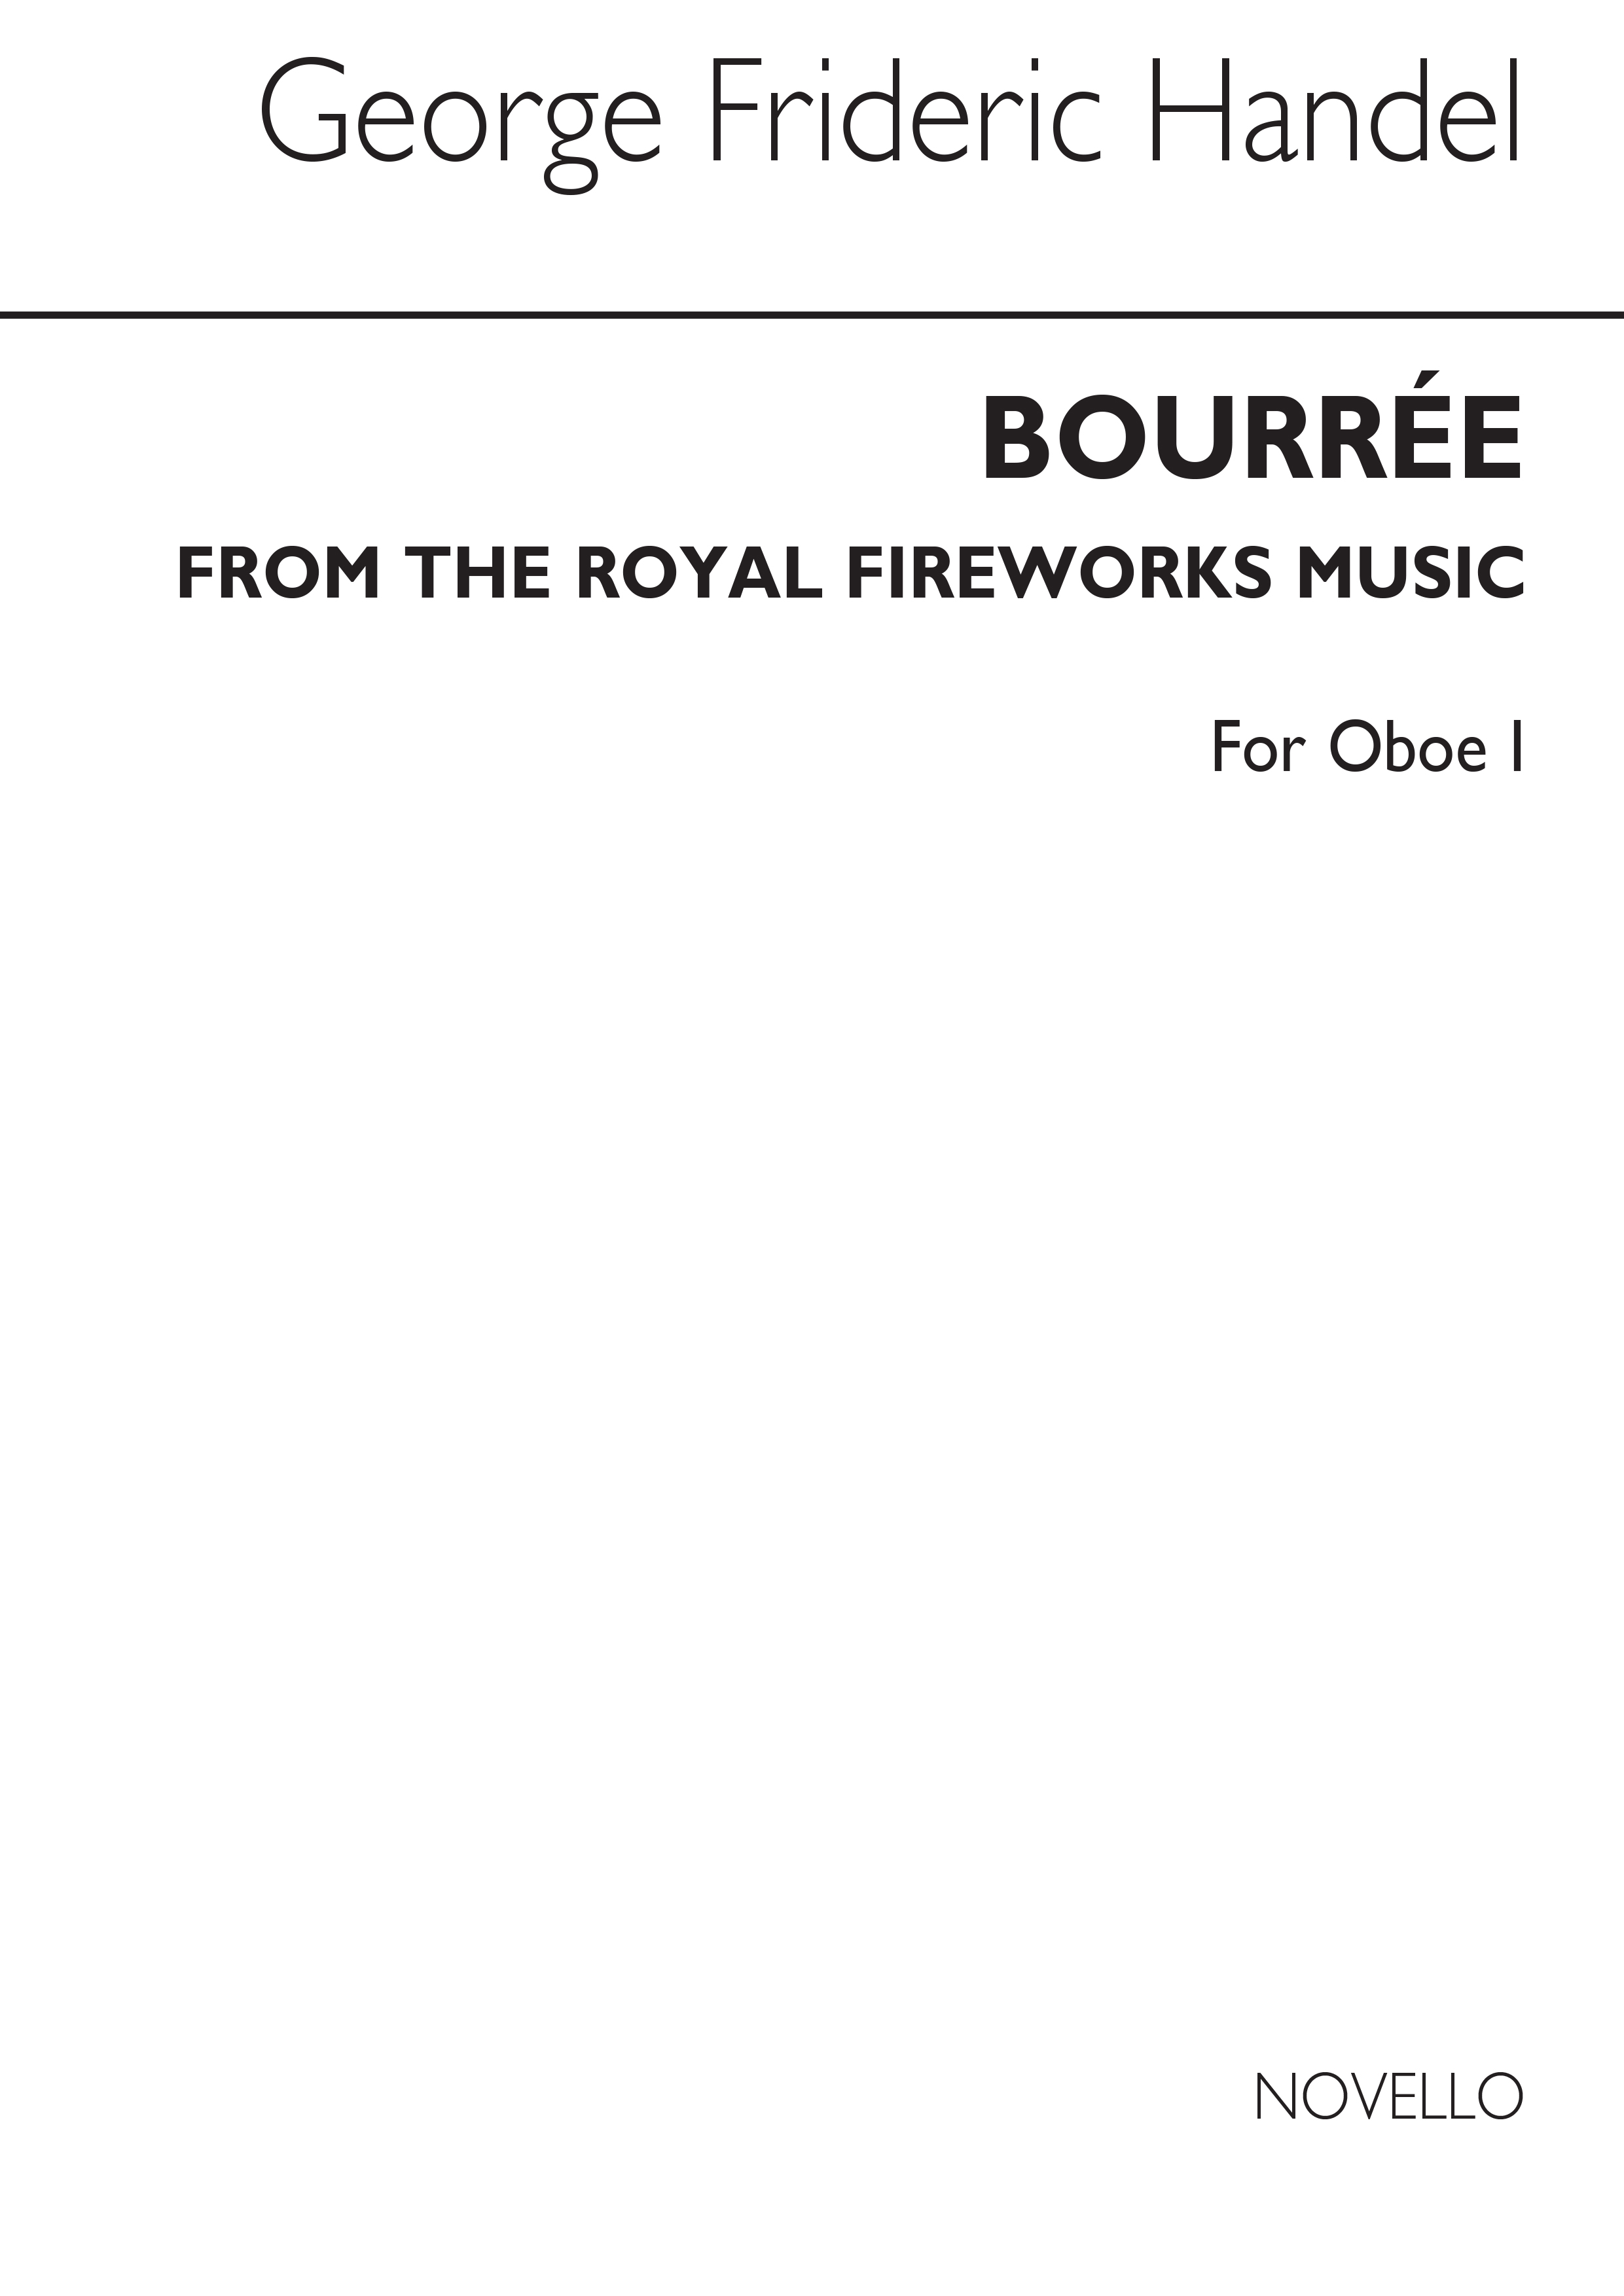 George Frideric Handel: Bourree From The Fireworks Music (Oboe 1)